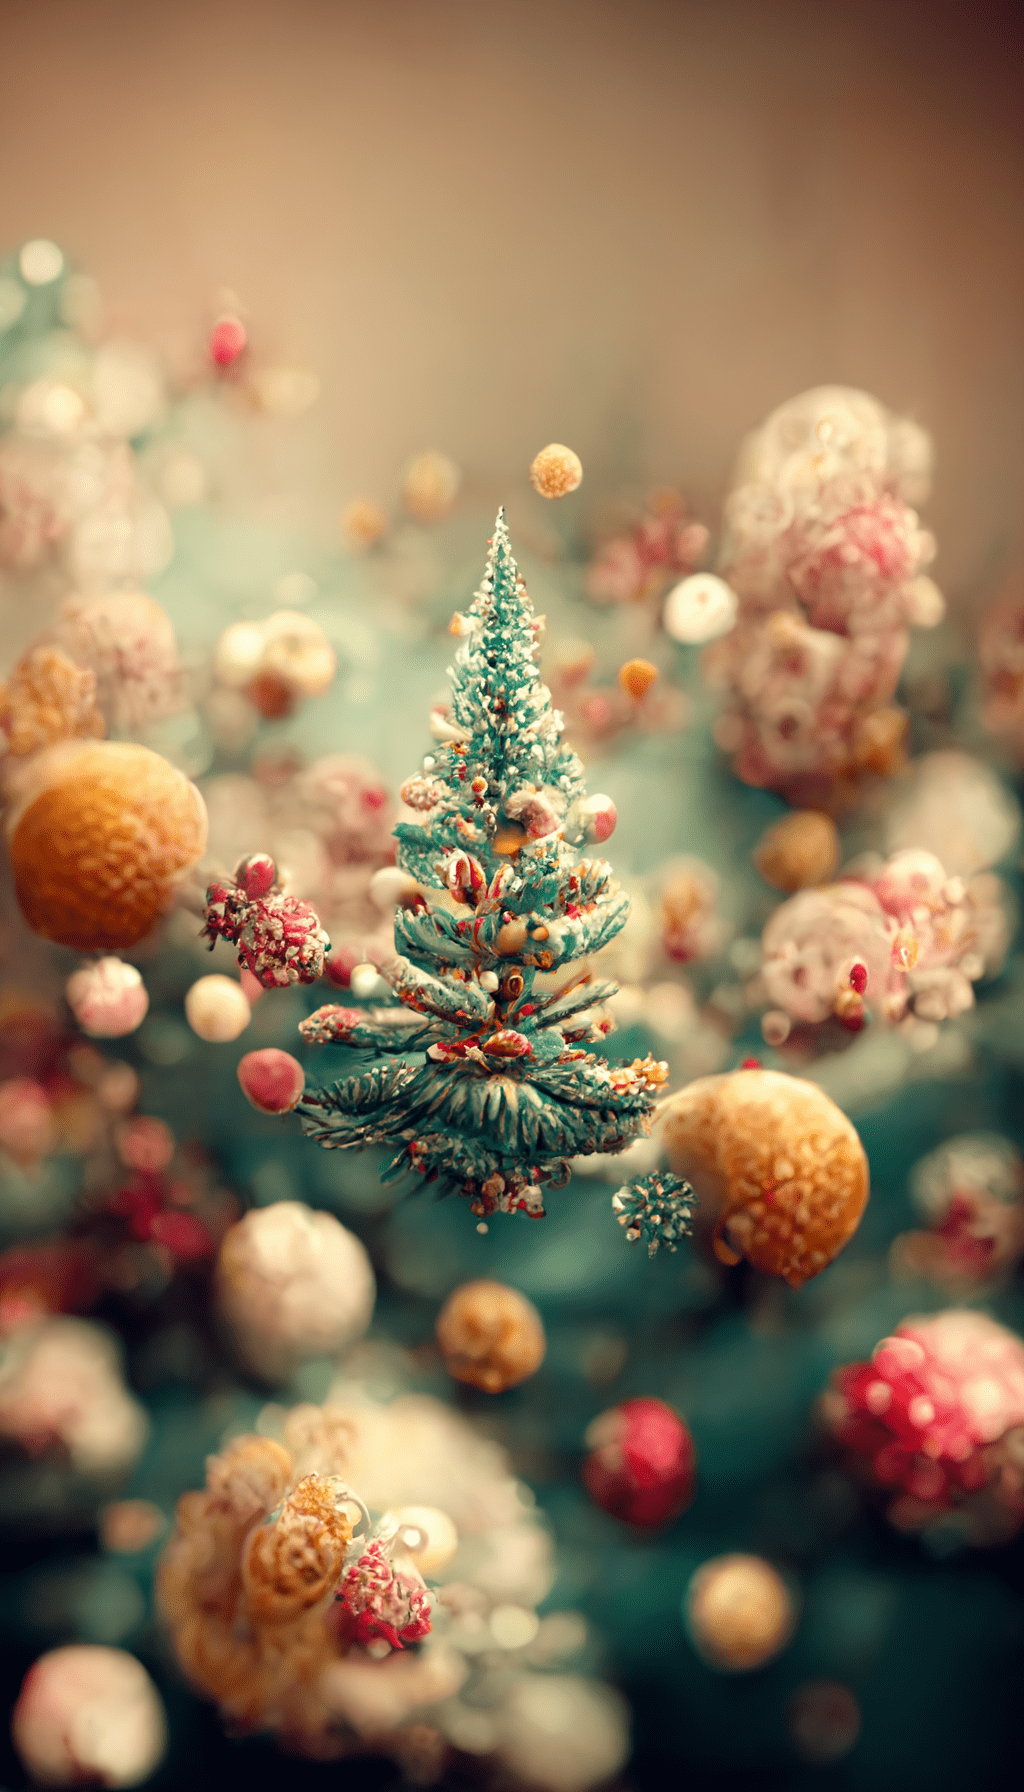 Download 3D Christmas 1 live wallpaper for android, 3D Christmas 1